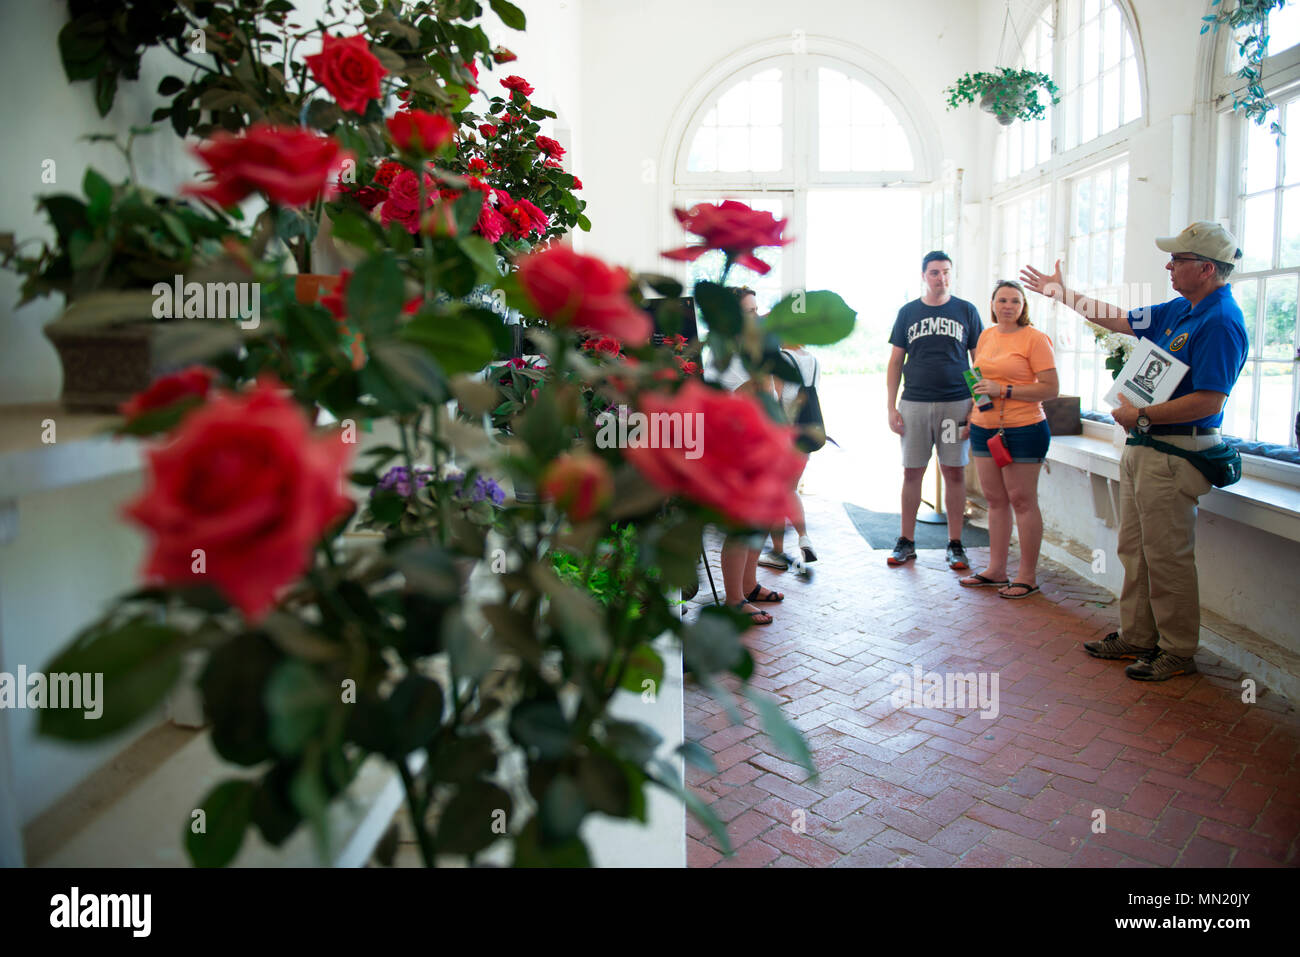 A volunteer explains to visitors the historic flora of Arlington House at Arlington National Cemetery, Arlington, Va., July 27, 2017.  In July of 2015, philanthropist David M. Rubinstein announced a $12.35 million donation to the National Park Foundation’s Centennial Campaign for America’s National Parks to restore and improve access to Arlington House.  This work is scheduled to begin in late August 2017, limiting access to visitors.  (U.S. Army photo by Elizabeth Fraser / Arlington National Cemetery / released) Stock Photo